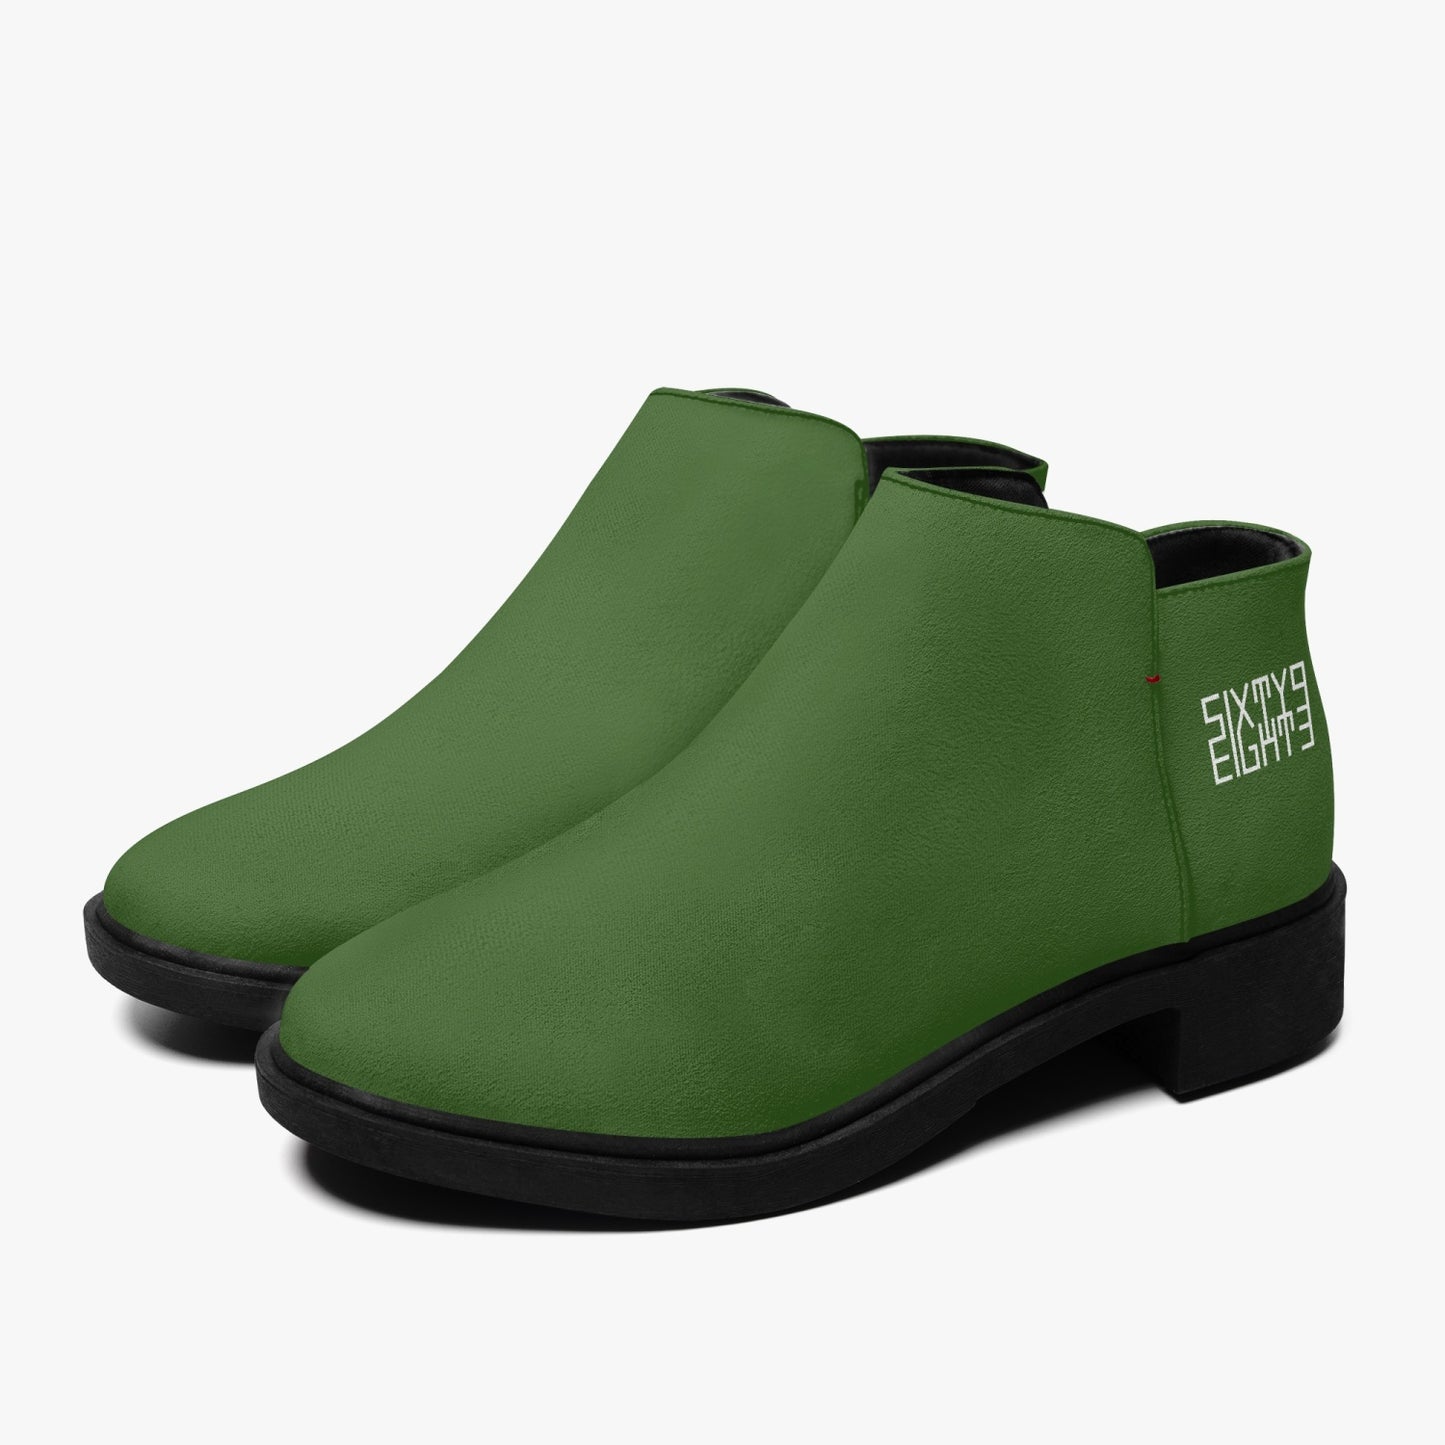 Sixty Eight 93 Logo White Forest Green Suede Zipper Boots